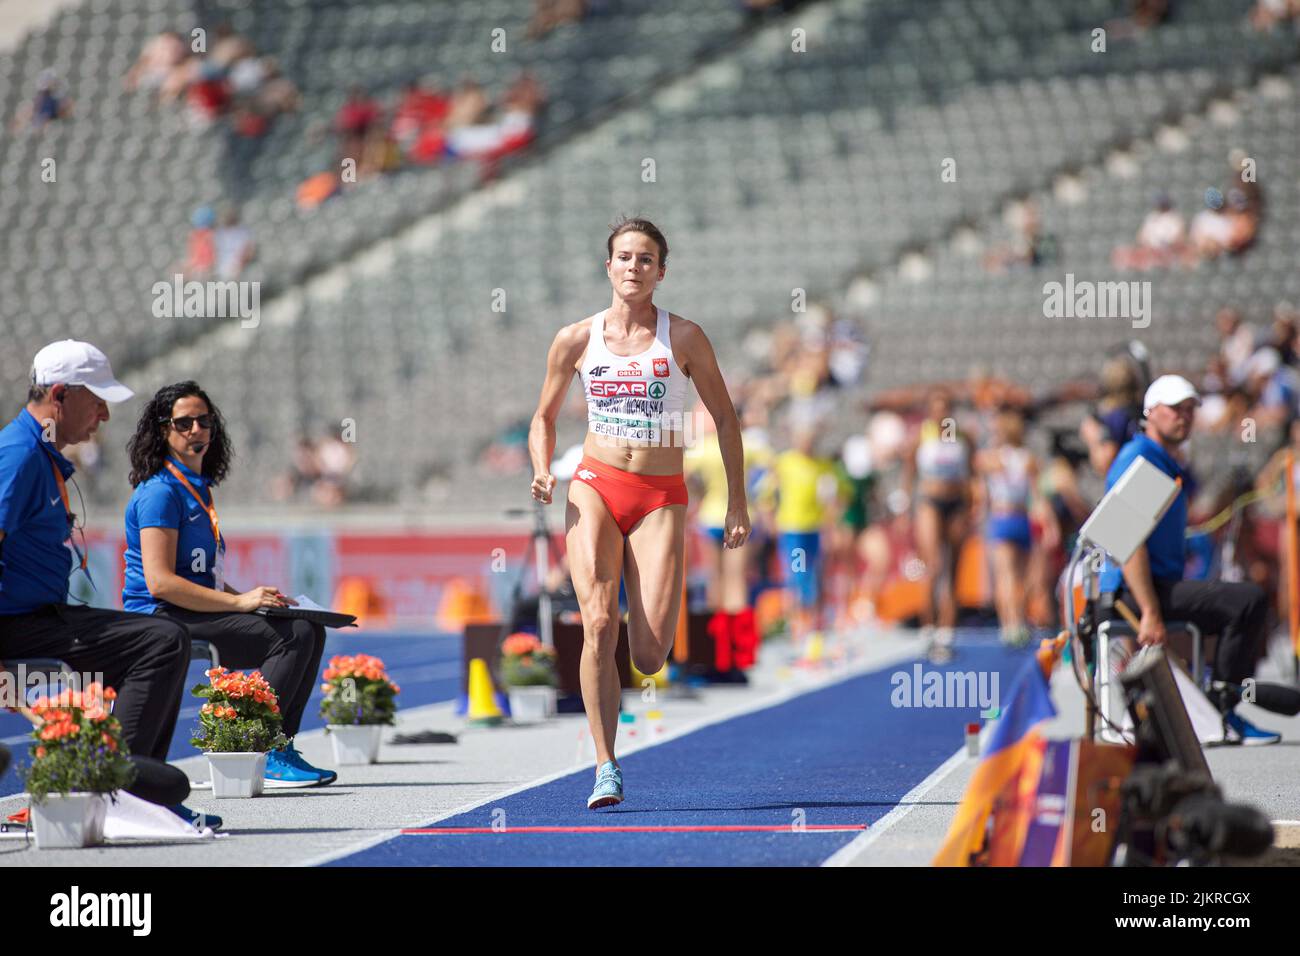 Anna Jagaciak participating in the triple jump at the European Athletics Championships in Berlin 2018. Stock Photo